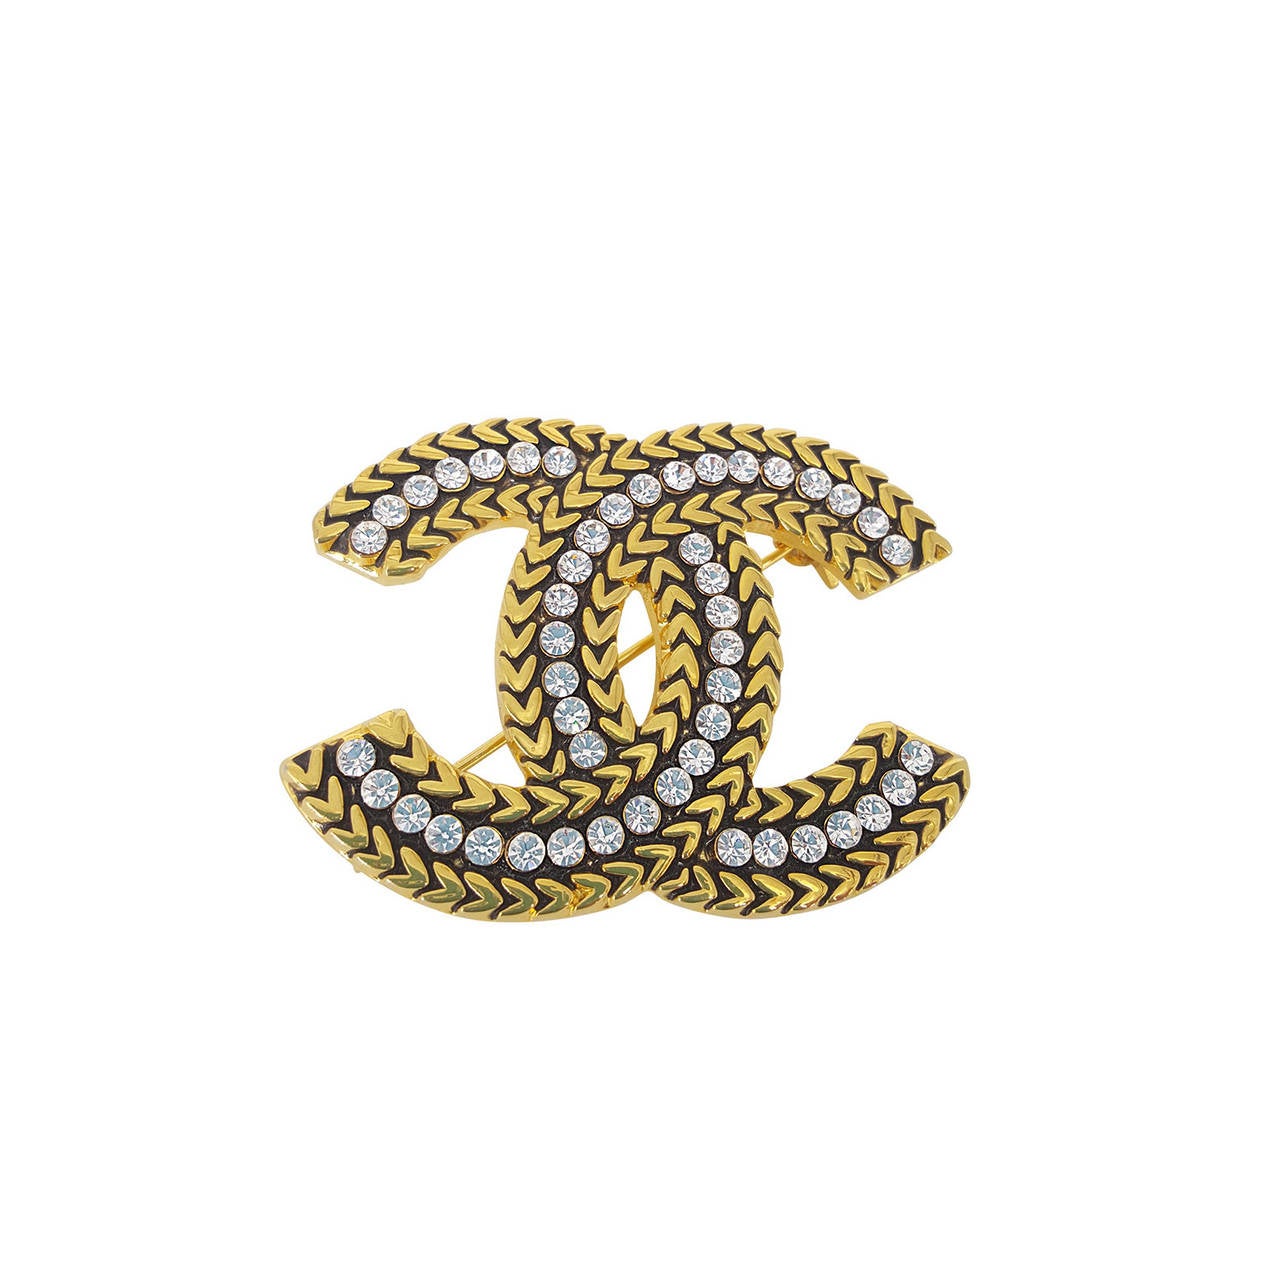 Vintage Large Chanel "CC" Brooch In Black, Gold, and Crystal.